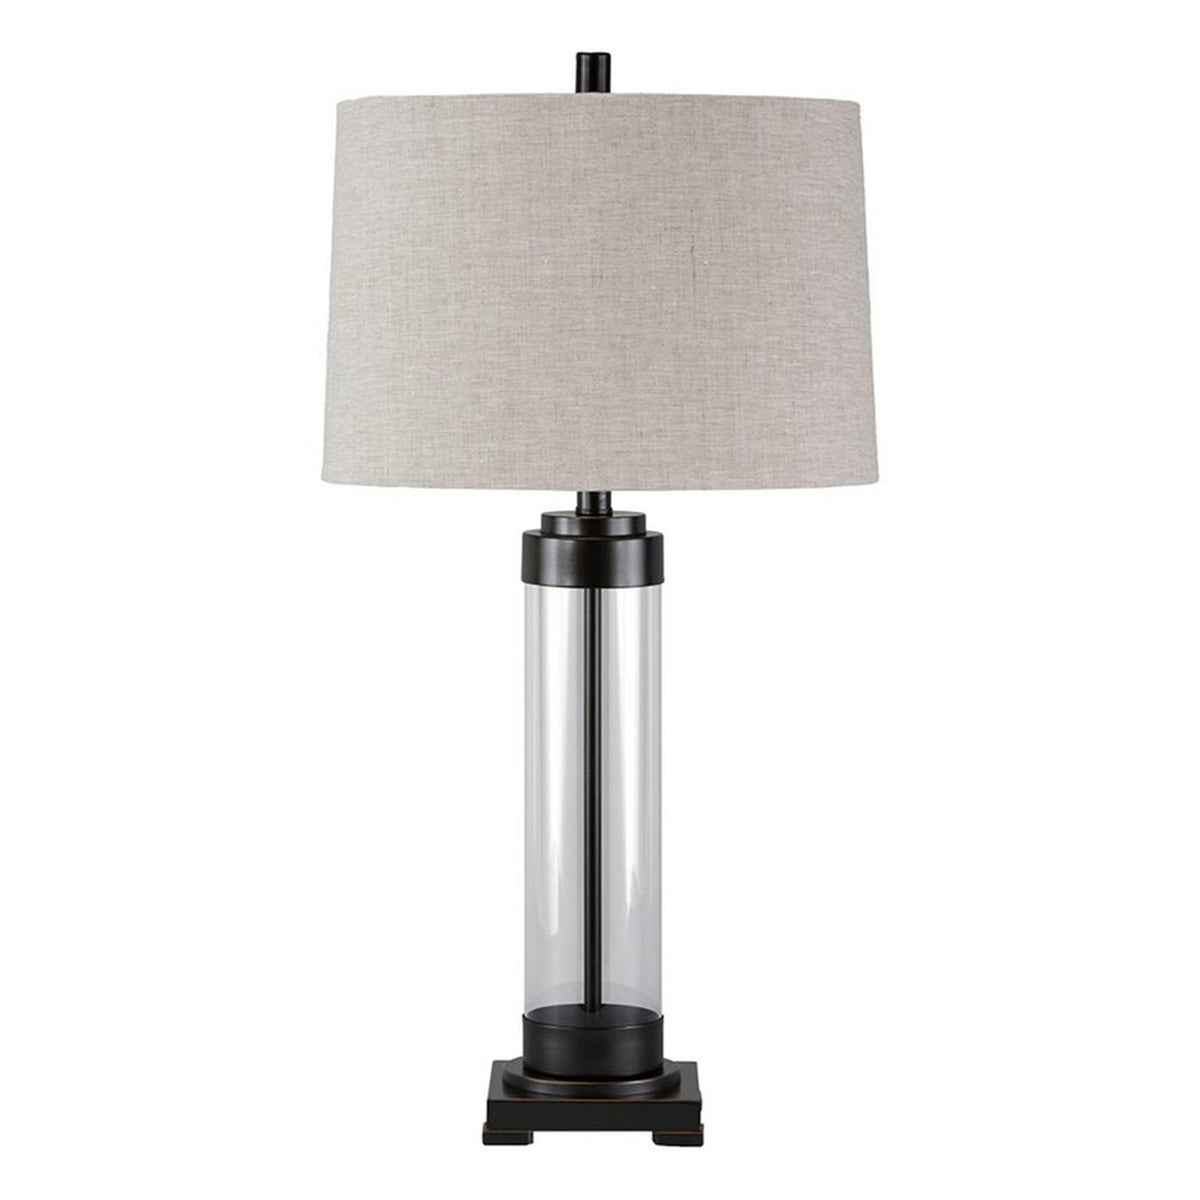 Glass and Metal Frame Table Lamp with Fabric Shade, Gray and Black - BM227351